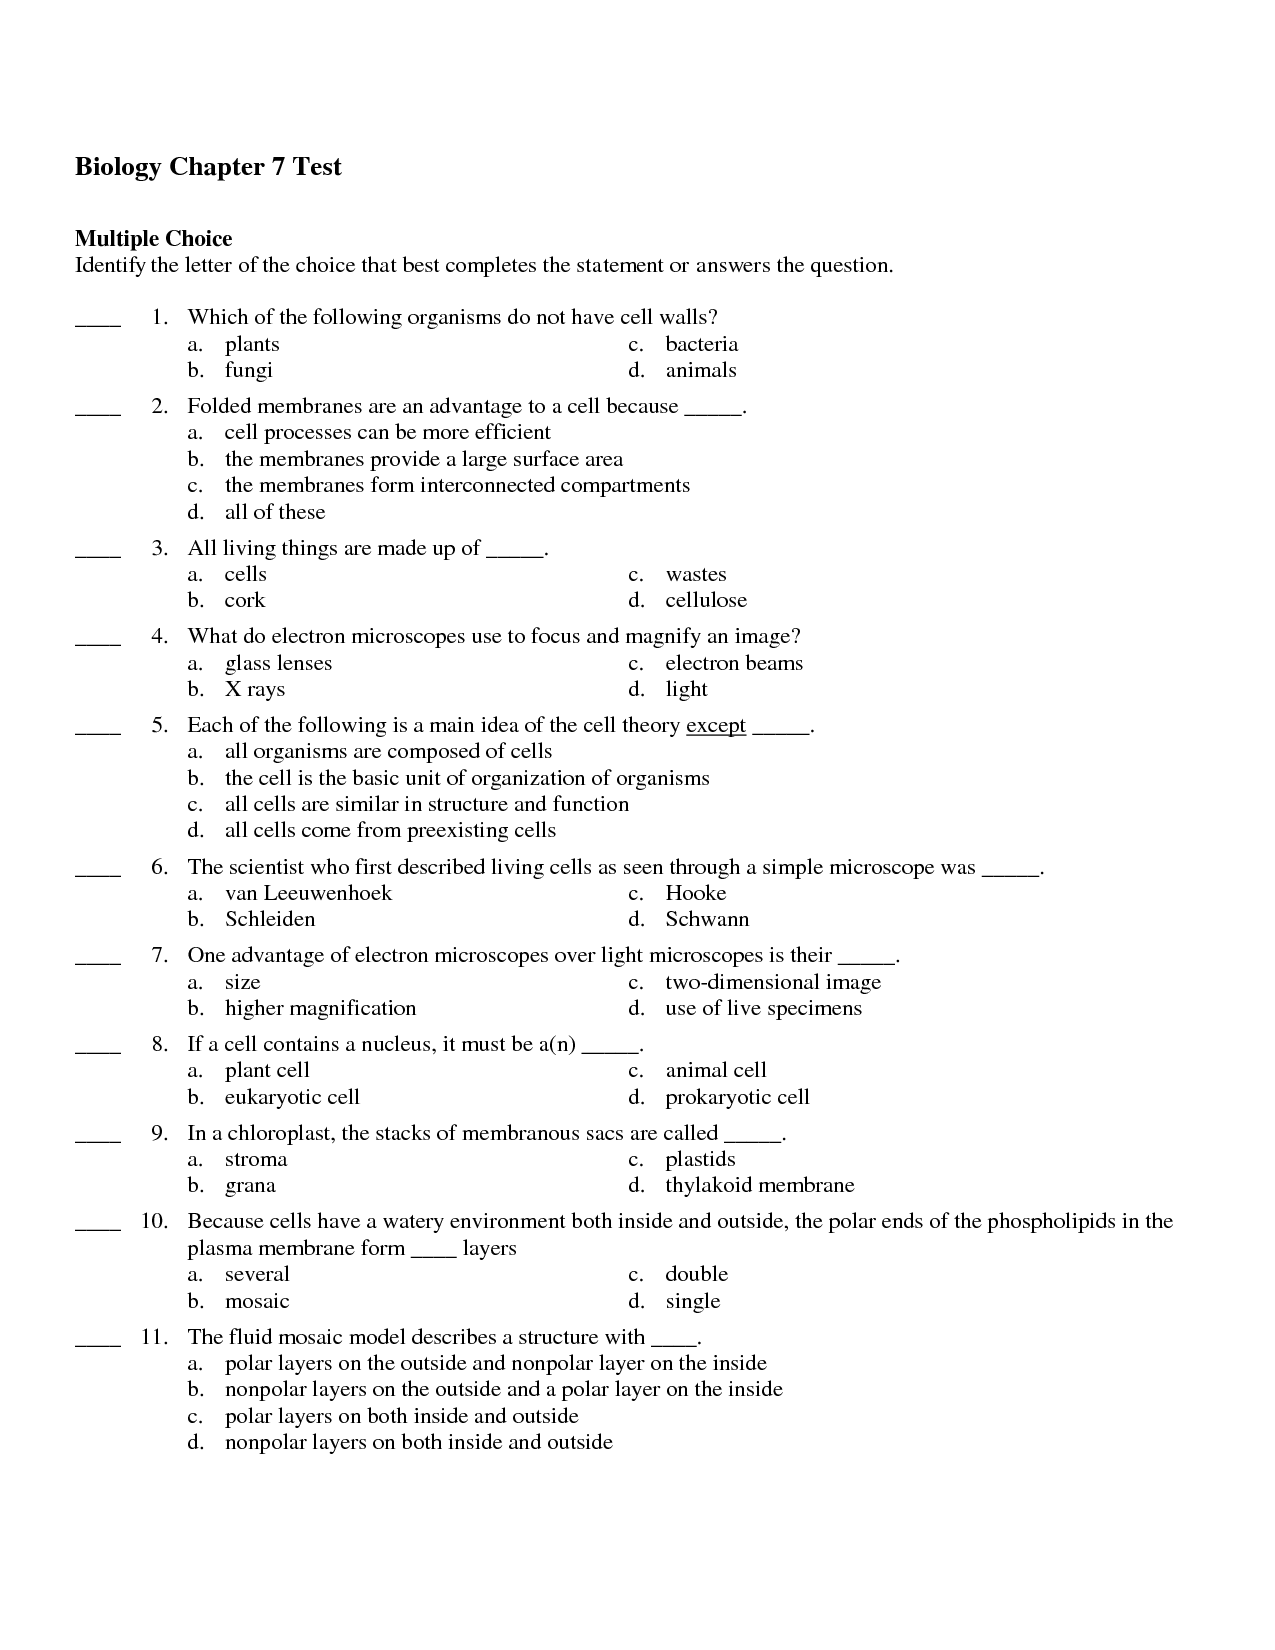 Biology Chapter 1 Test Answers Image